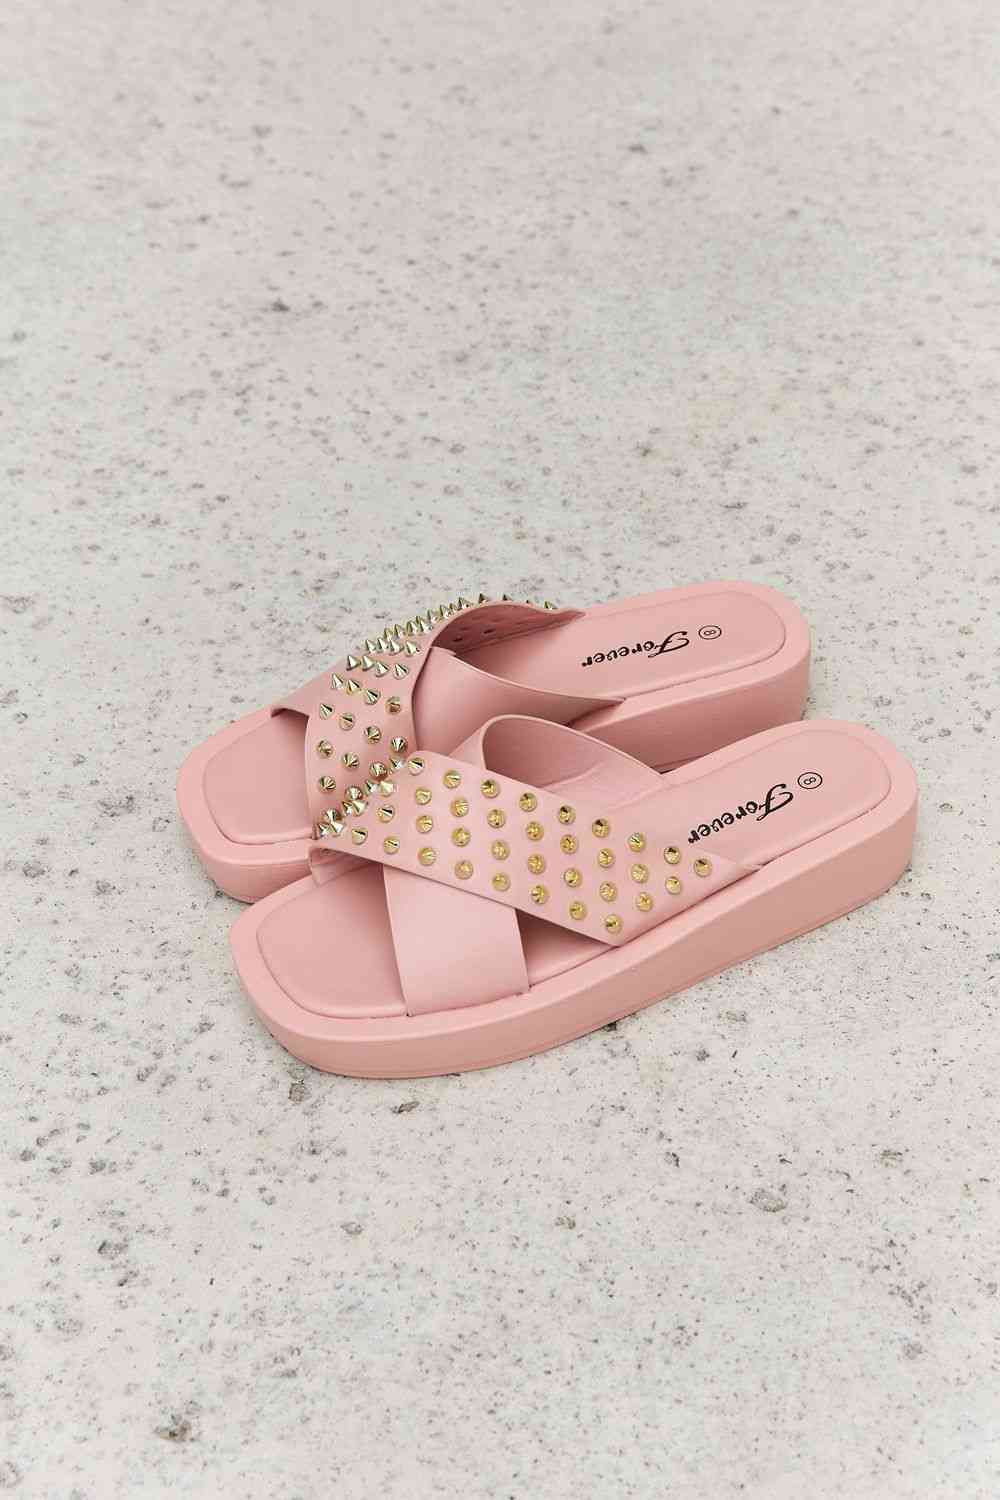 Studded Cross Strap Sandals in Blush - Accessories - Shoes - 7 - 2024